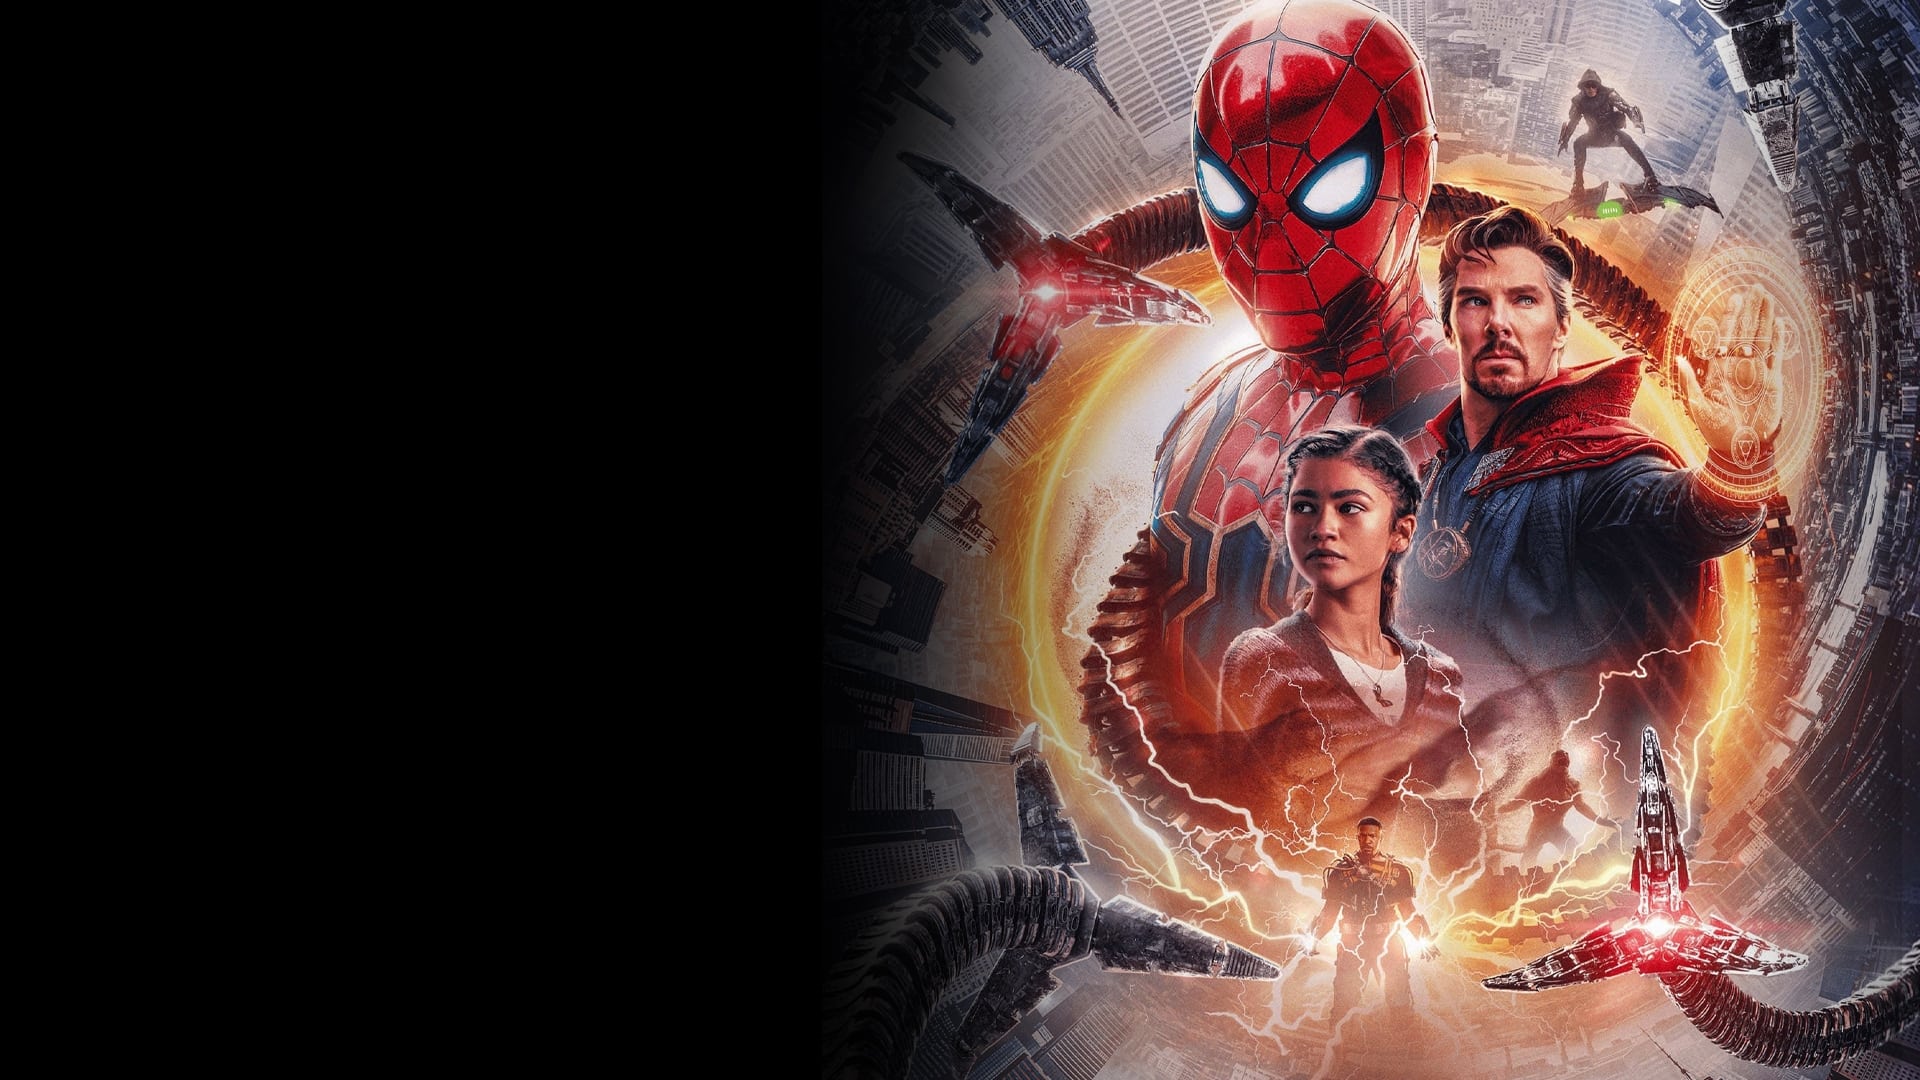 Spider-Man: No Way Home: Entertaining Although a Little Overhype